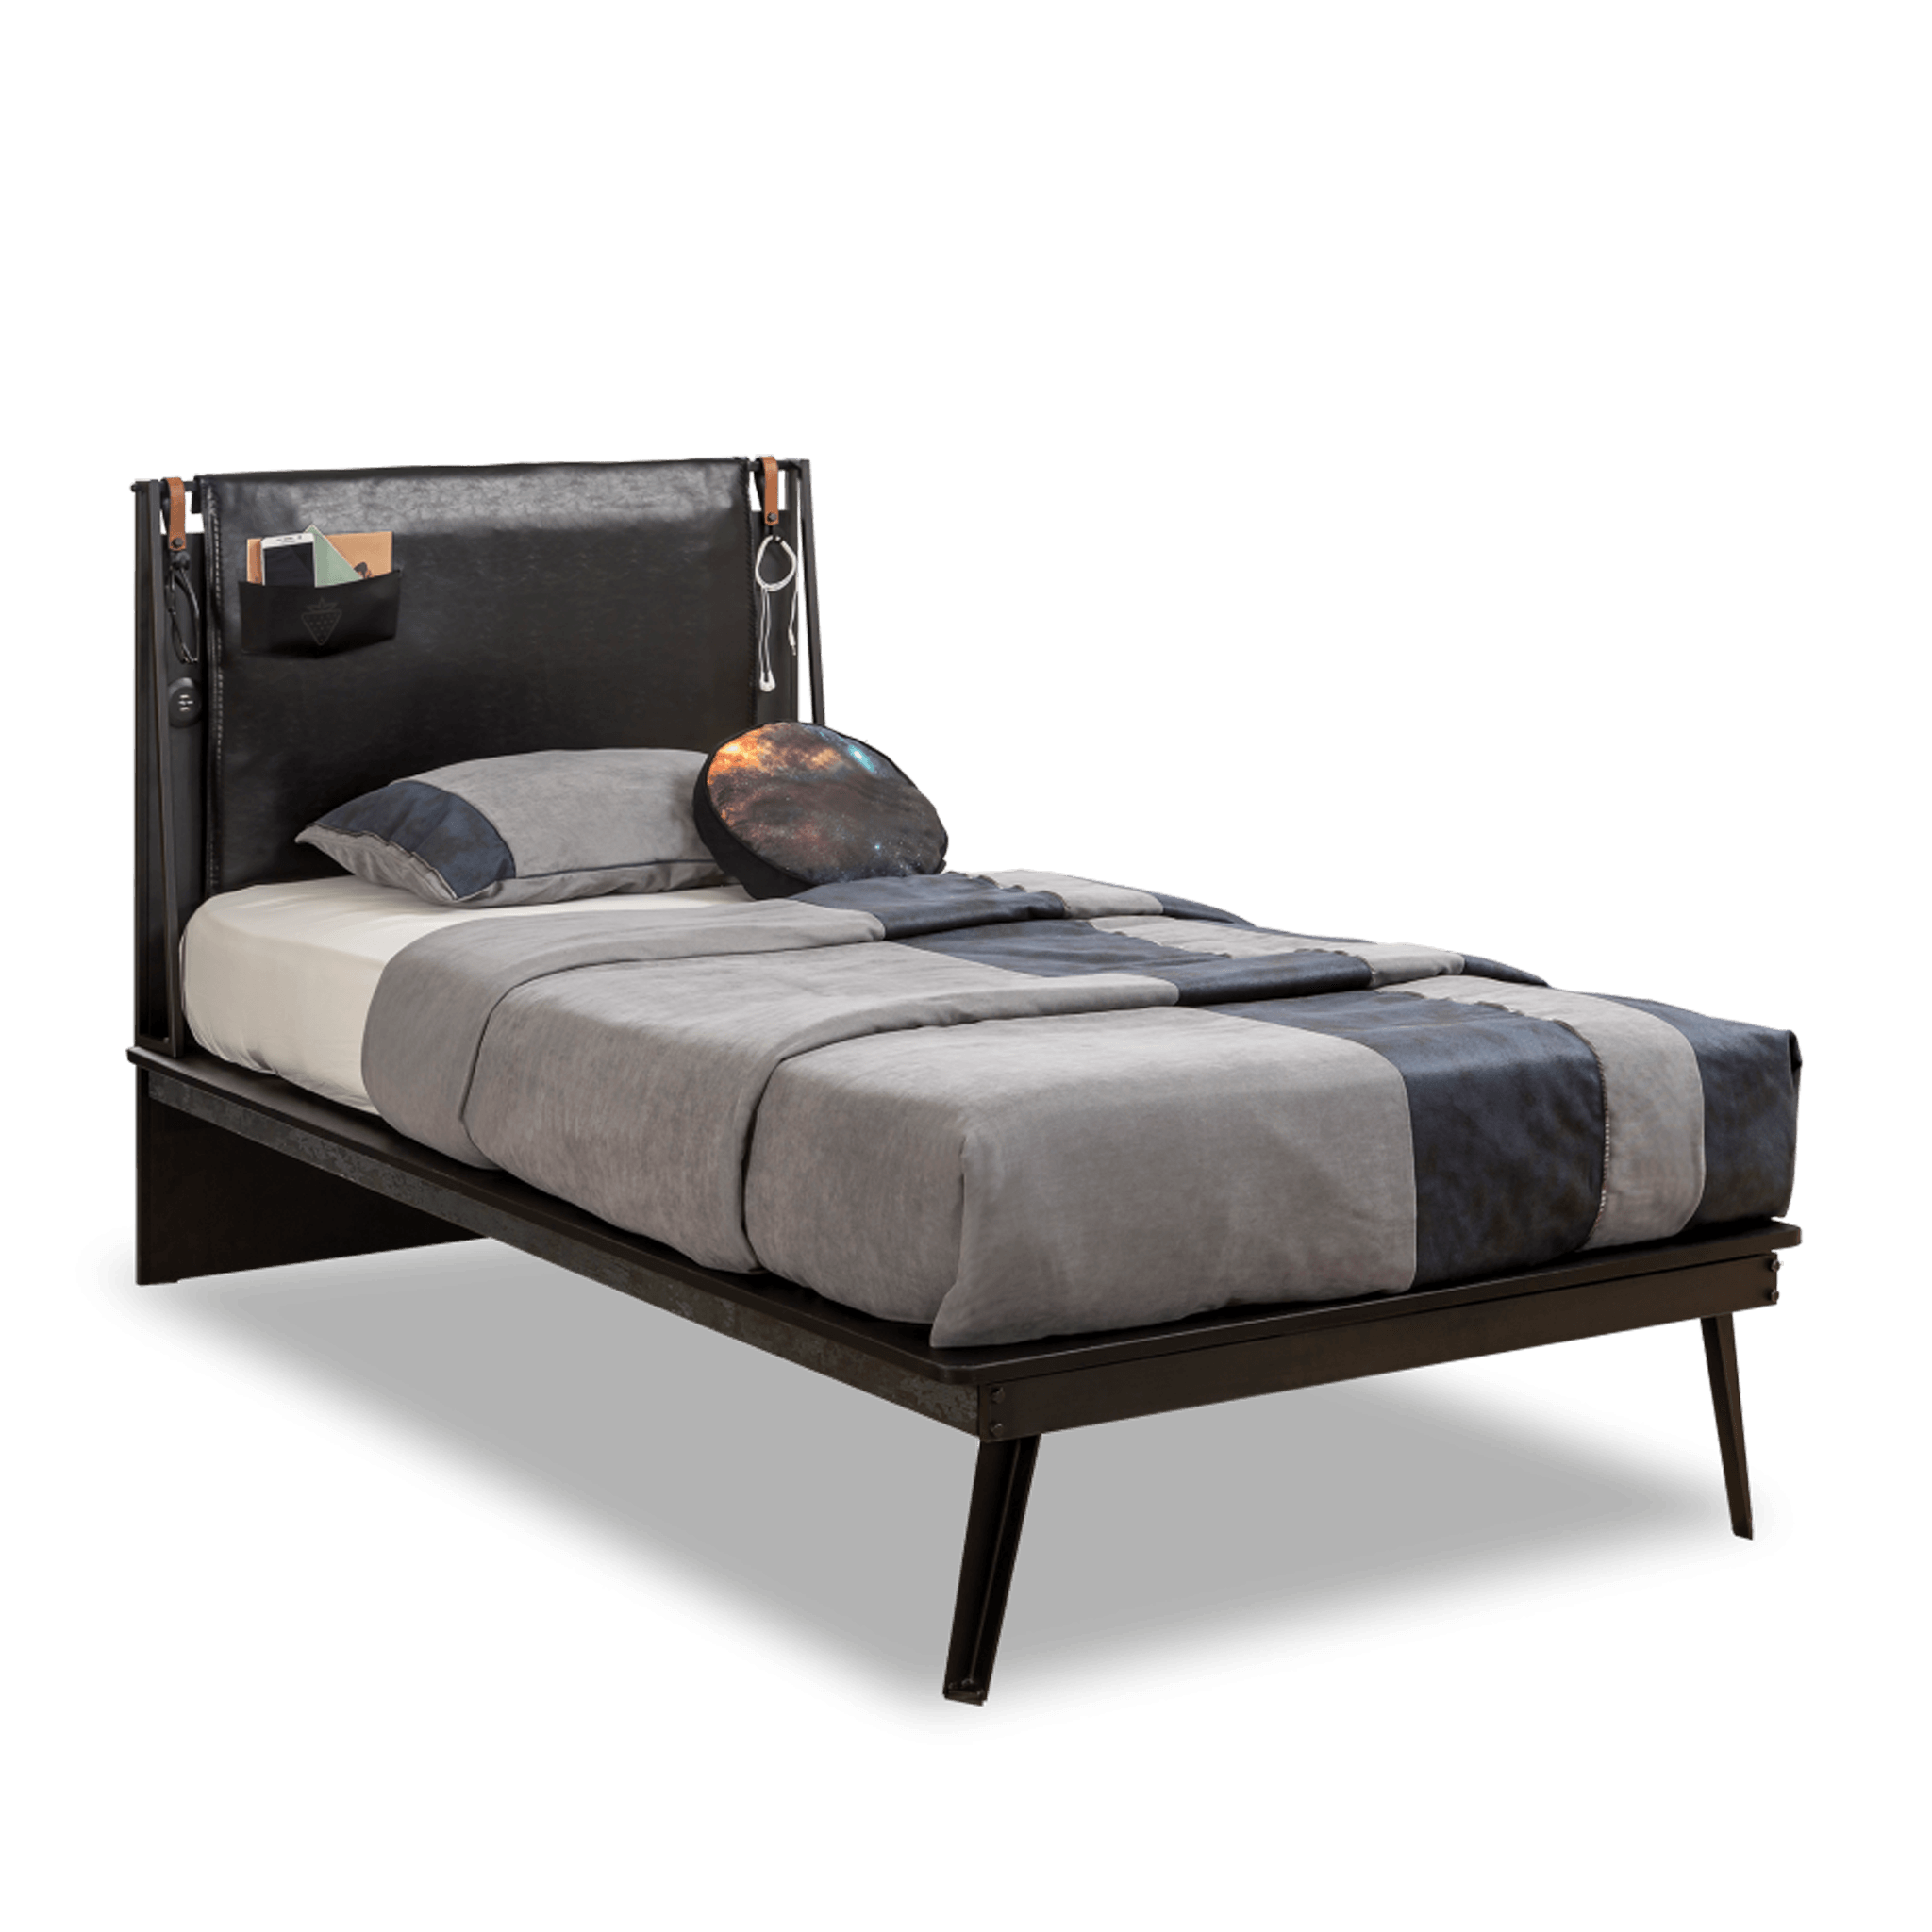 Cilek Dark Metal Line Bed (100X200 Cm Or 120X200 Cm - With Pull Out Options)